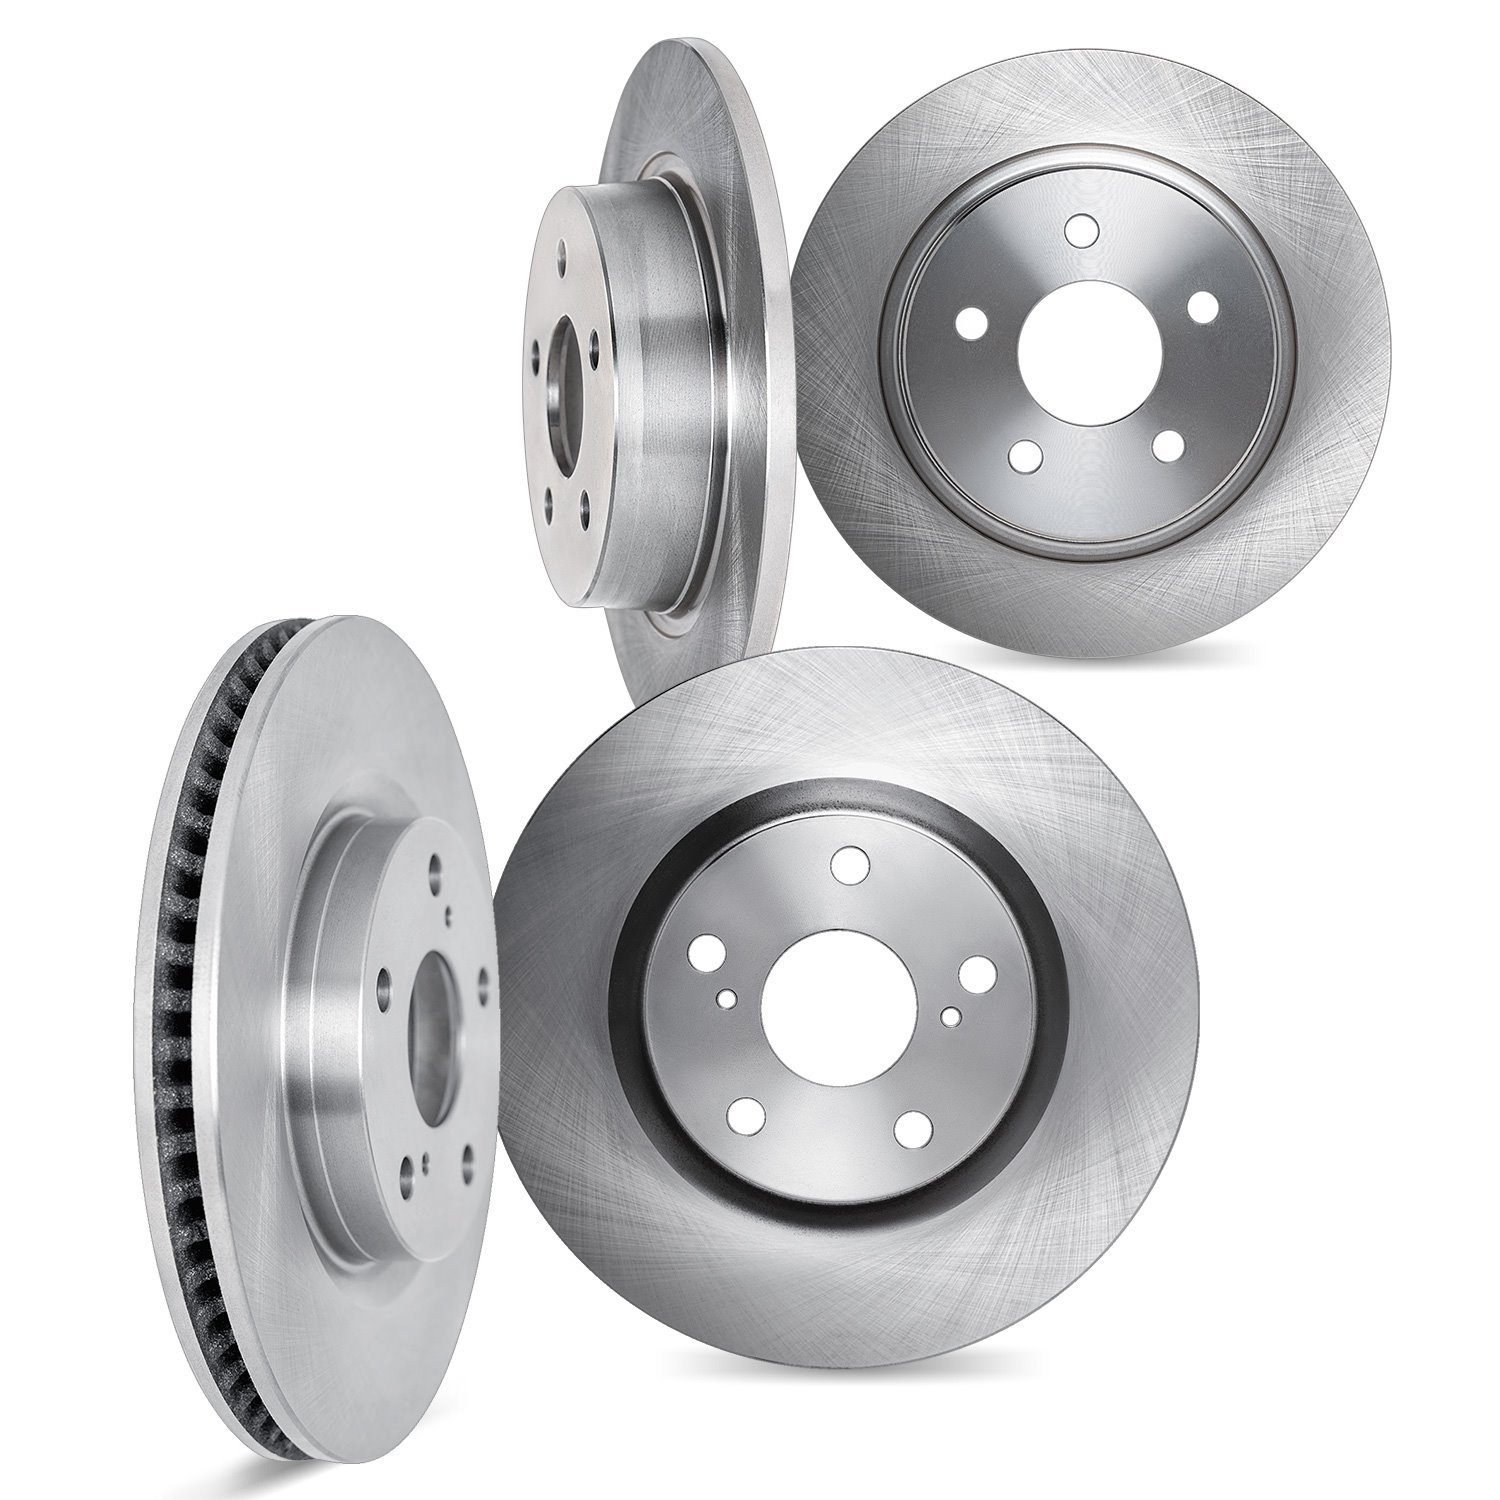 6004-32013 Brake Rotors, Fits Select Mini, Position: Front and Rear